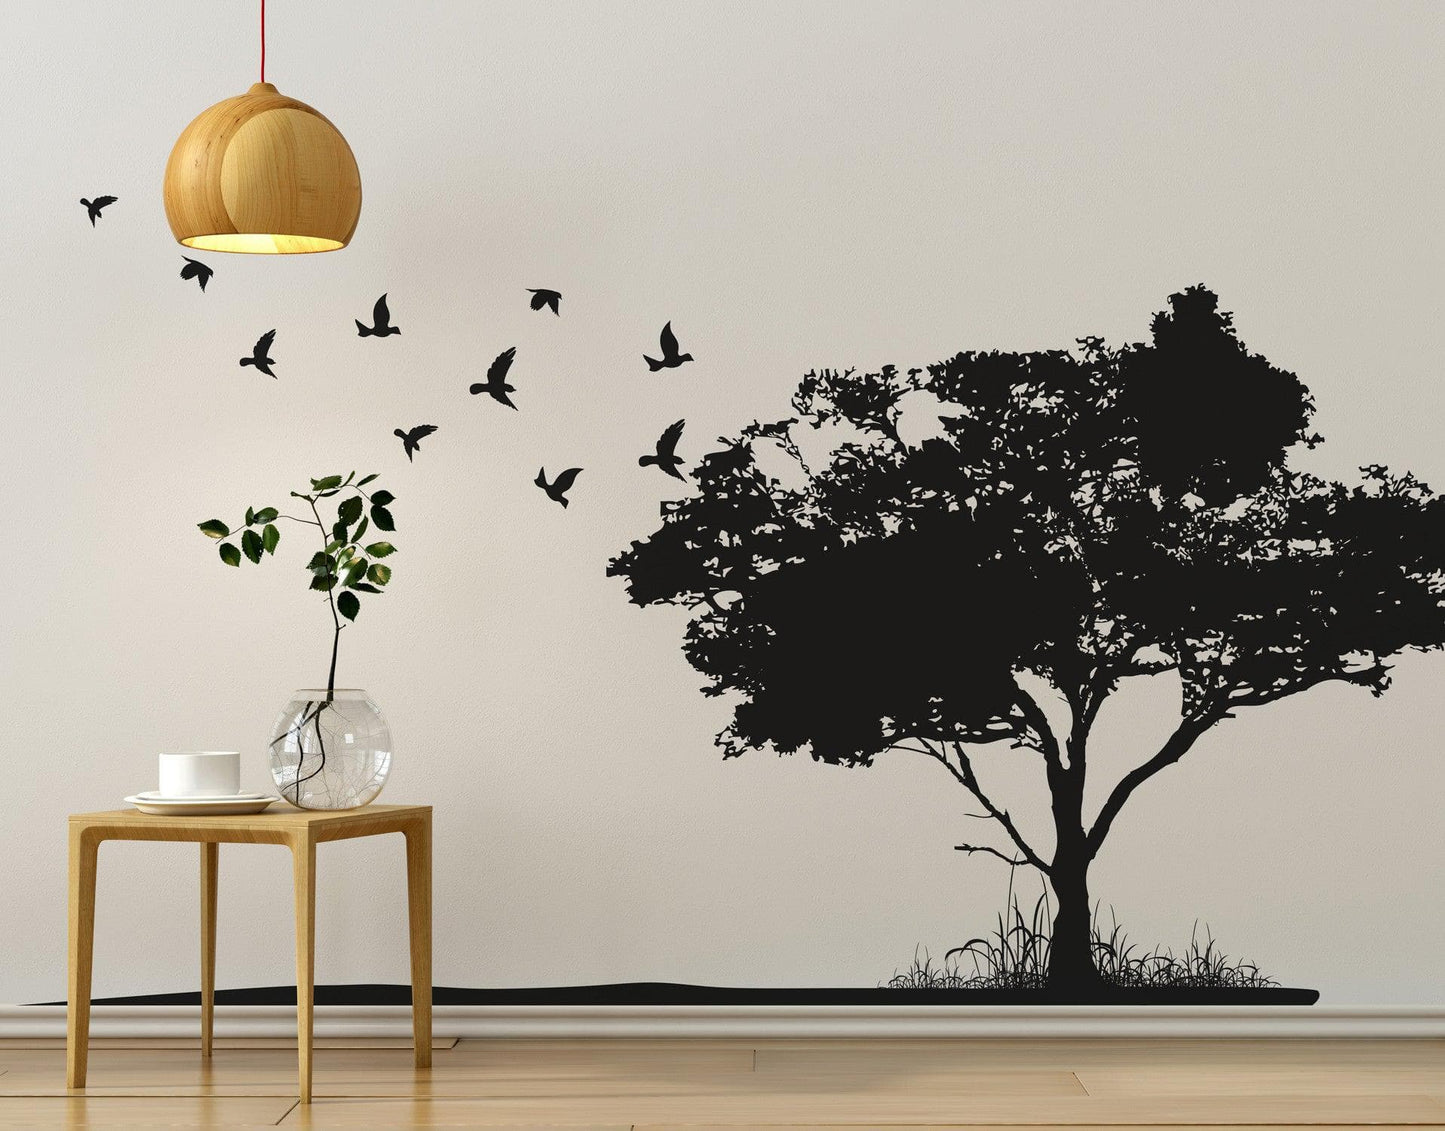 Flying Birds on Tree Wall Decal #6054